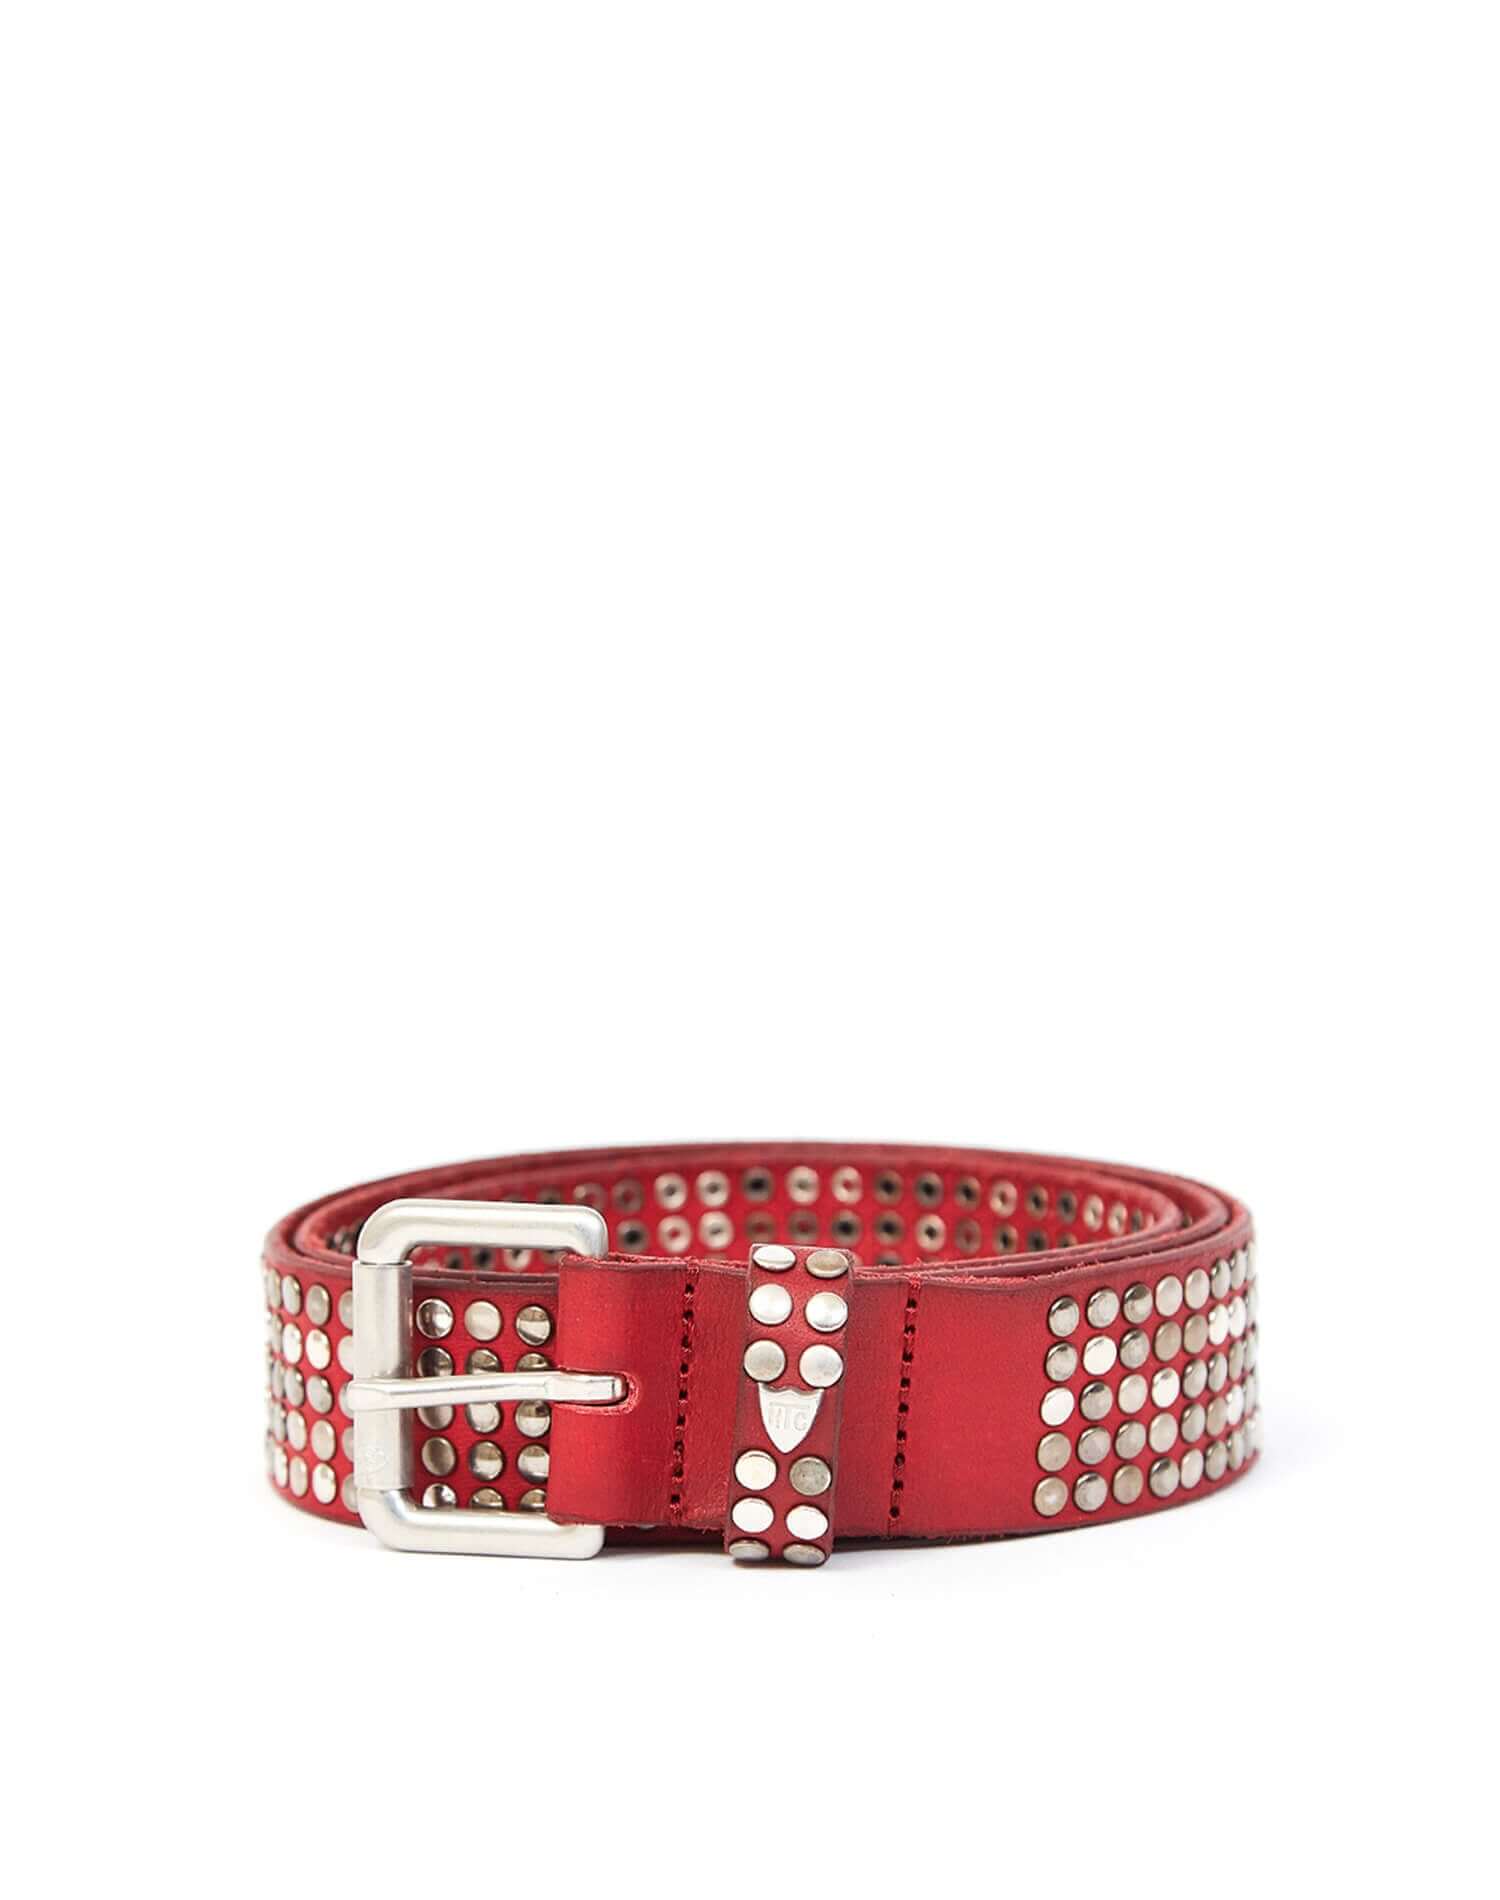 5.000 STUDS BELT Red leather belt with mixed studs, brass buckle, studded zamac belt loop with HTC logo rivet. Height: 3.5 cm. Made in Italy. HTC LOS ANGELES